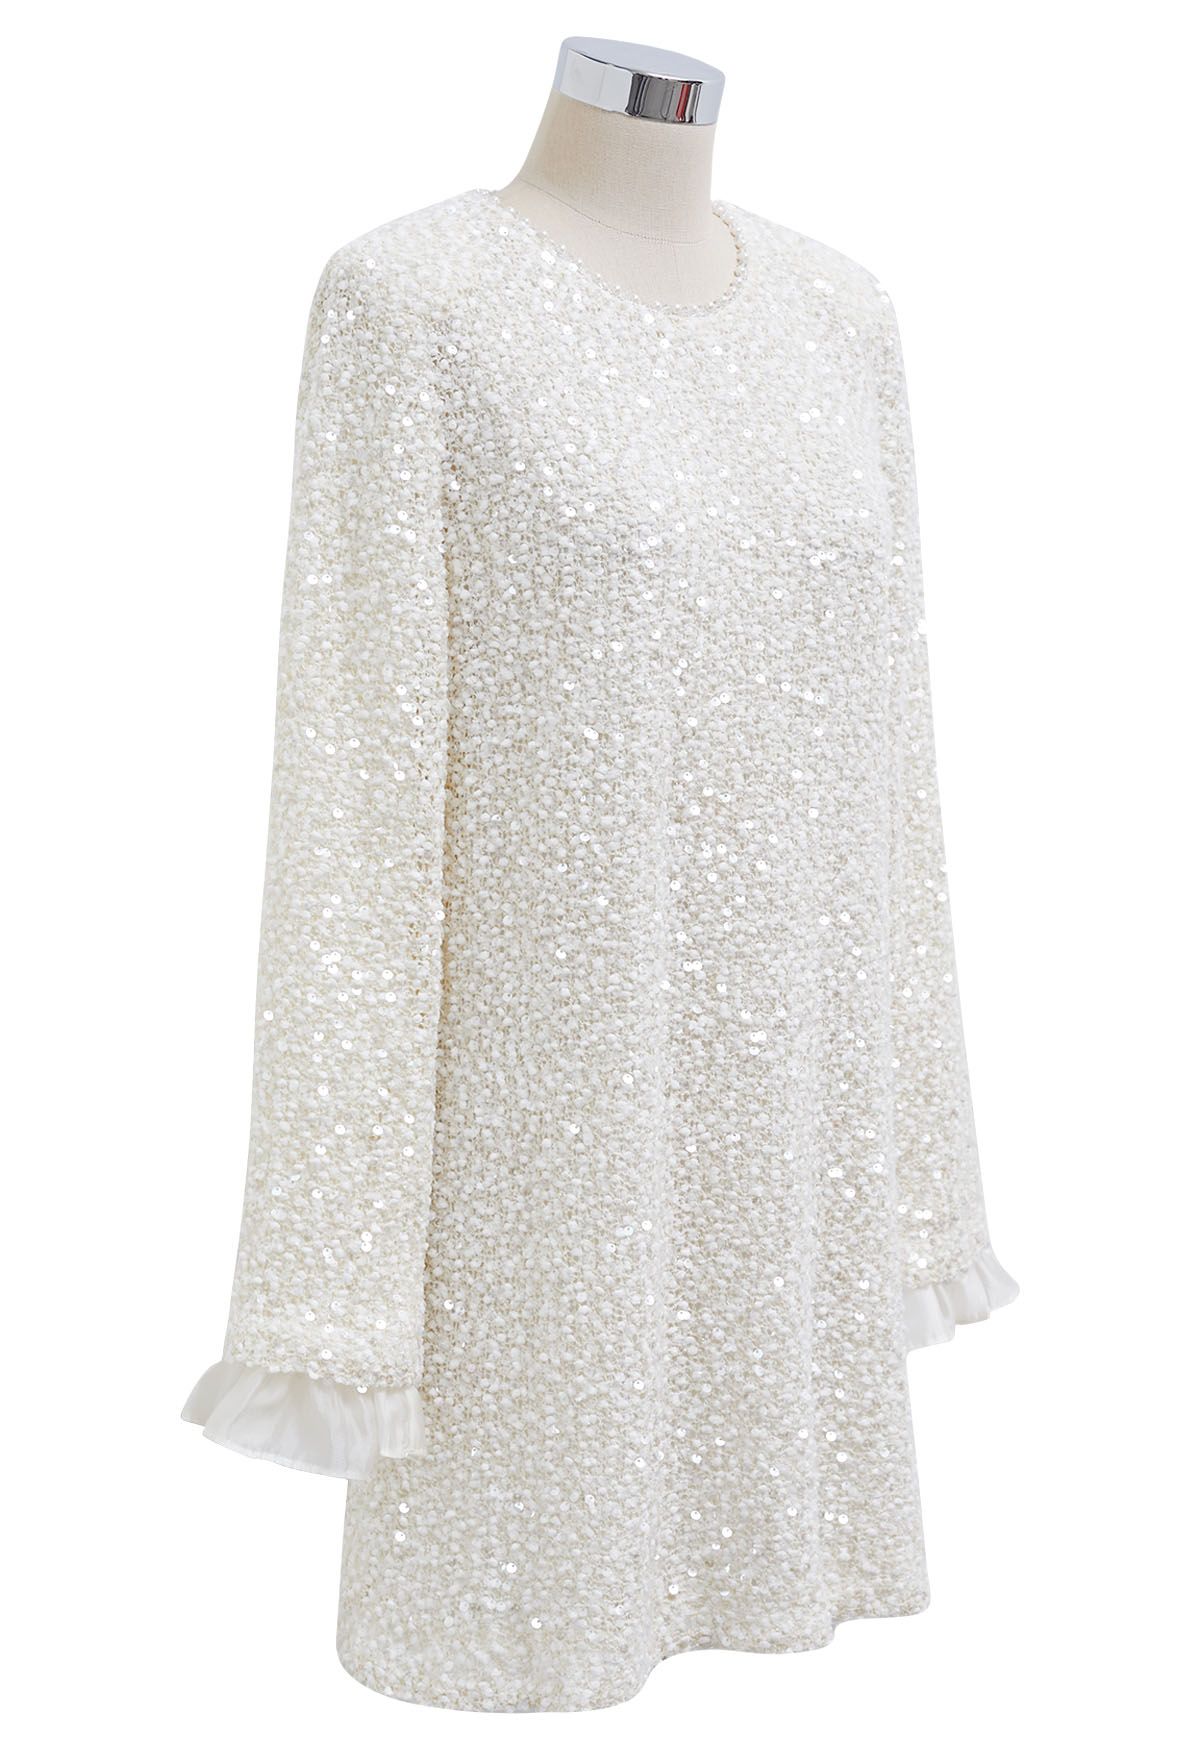 Sequined Hollow Out Knitted Shift Dress